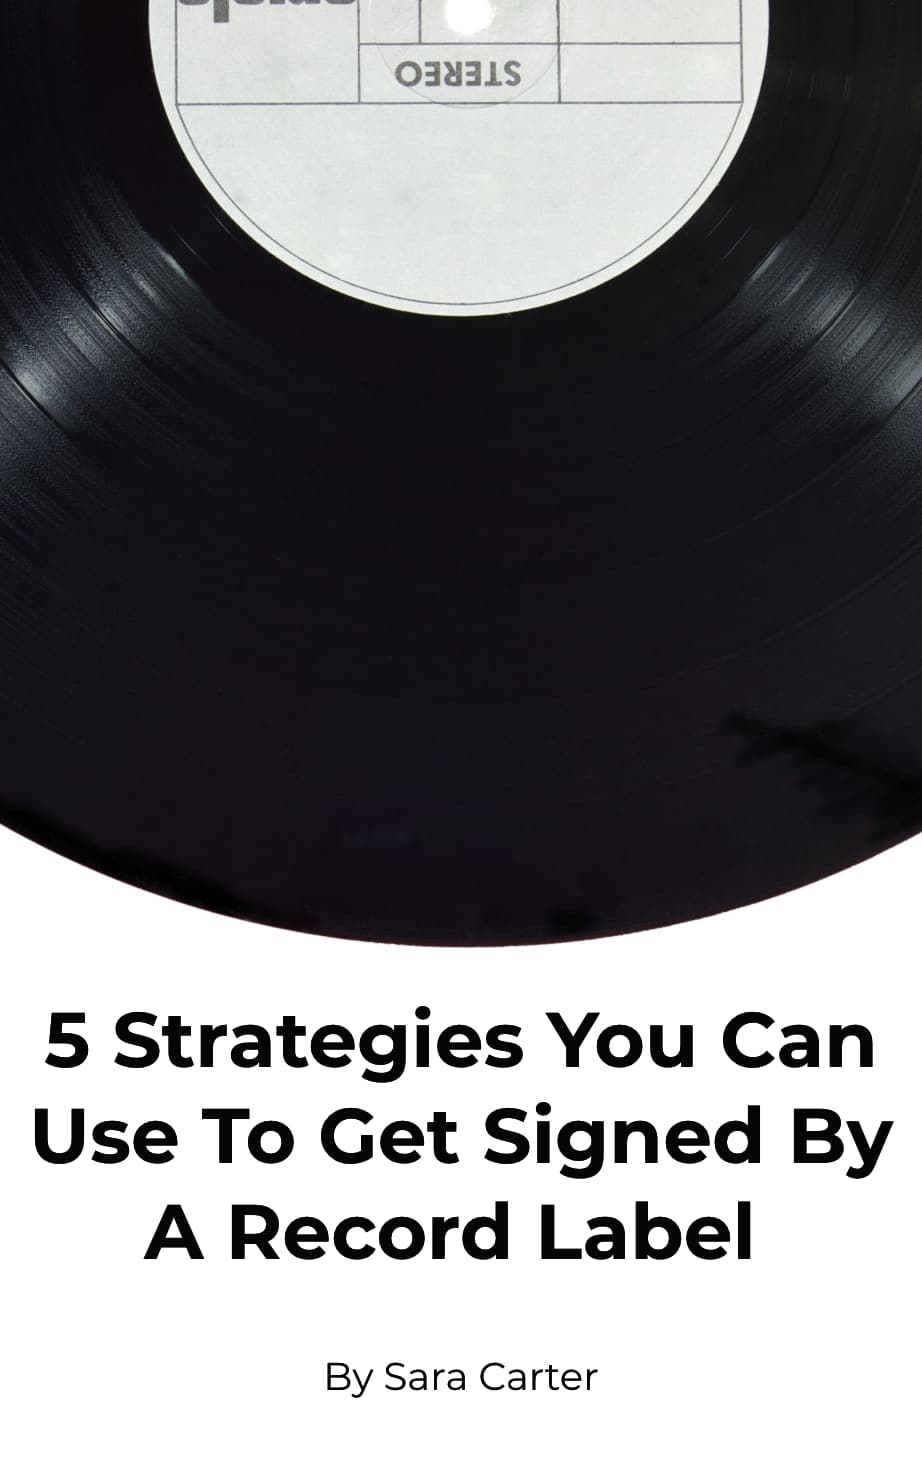 how to get signed by a record label